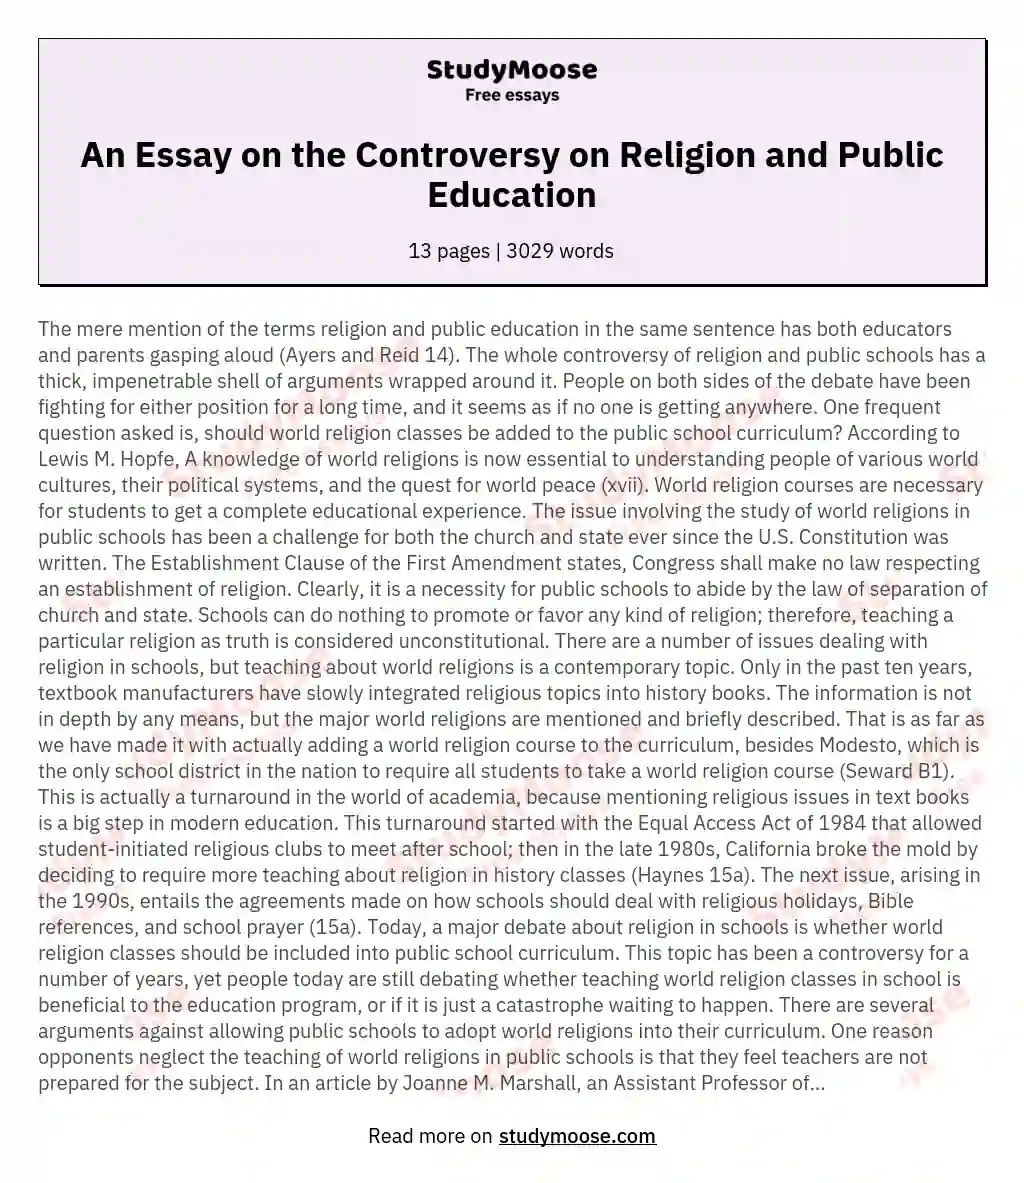 An Essay on the Controversy on Religion and Public Education essay